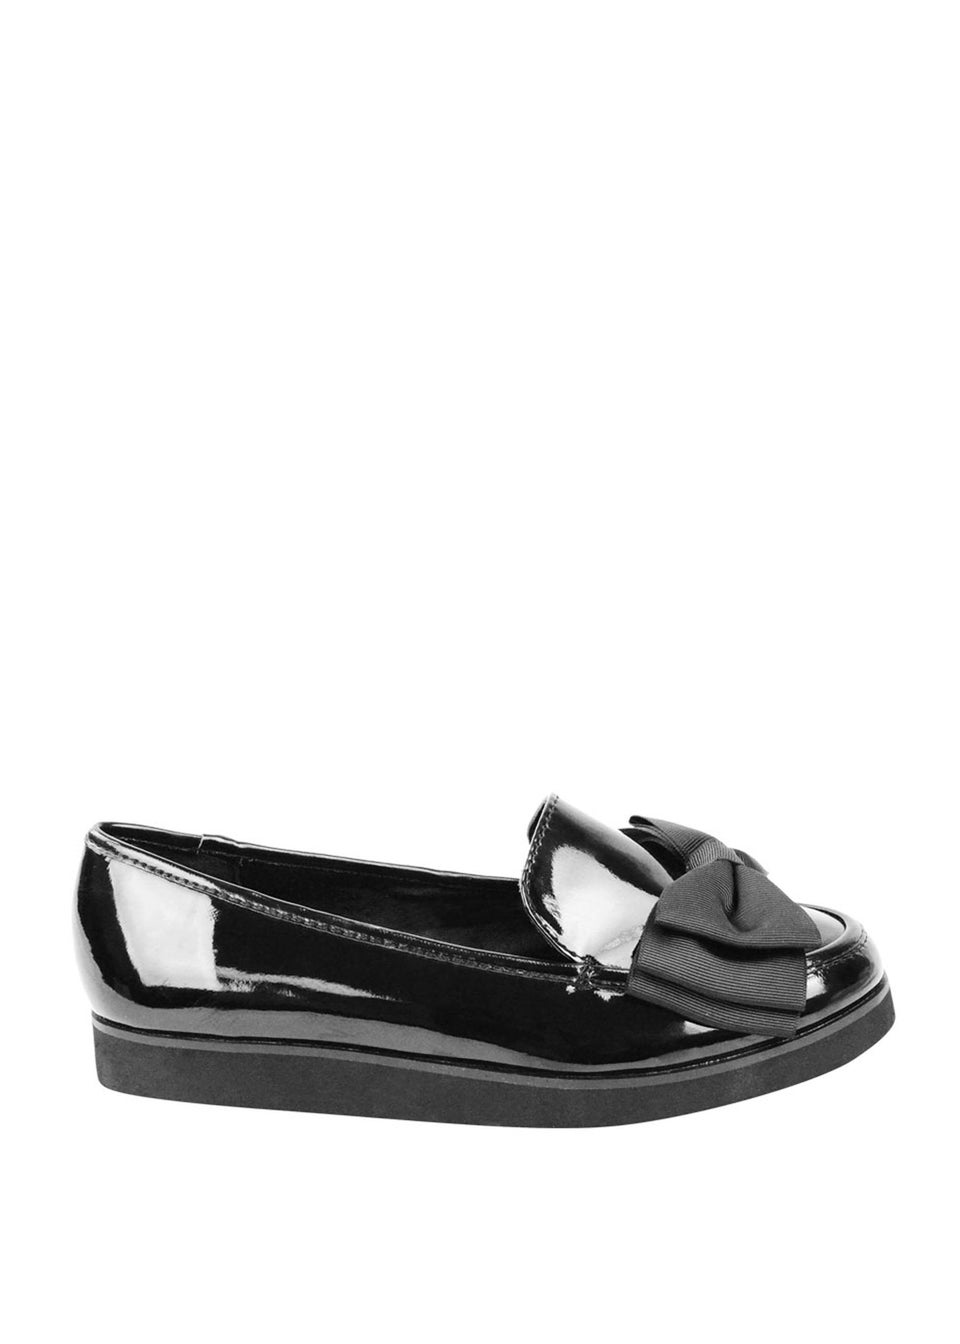 Where's That From Black Alpha Wide Fit Slip On Loafers